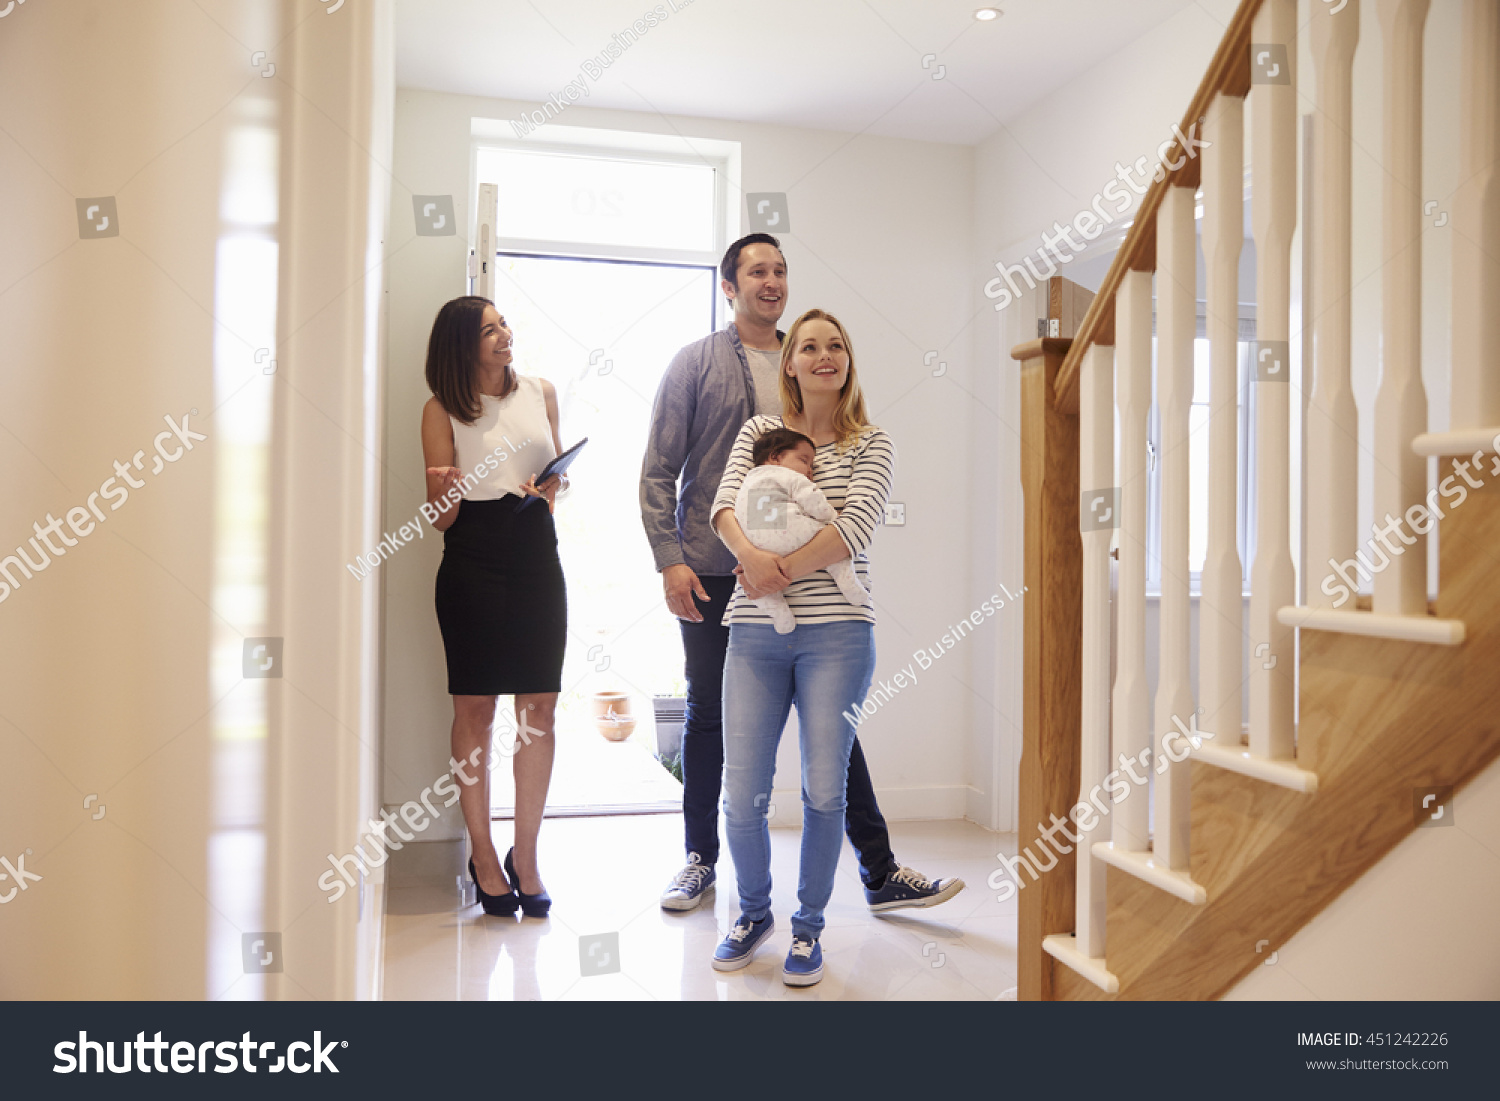 Realtor Showing Young Family Around Property For Sale #451242226